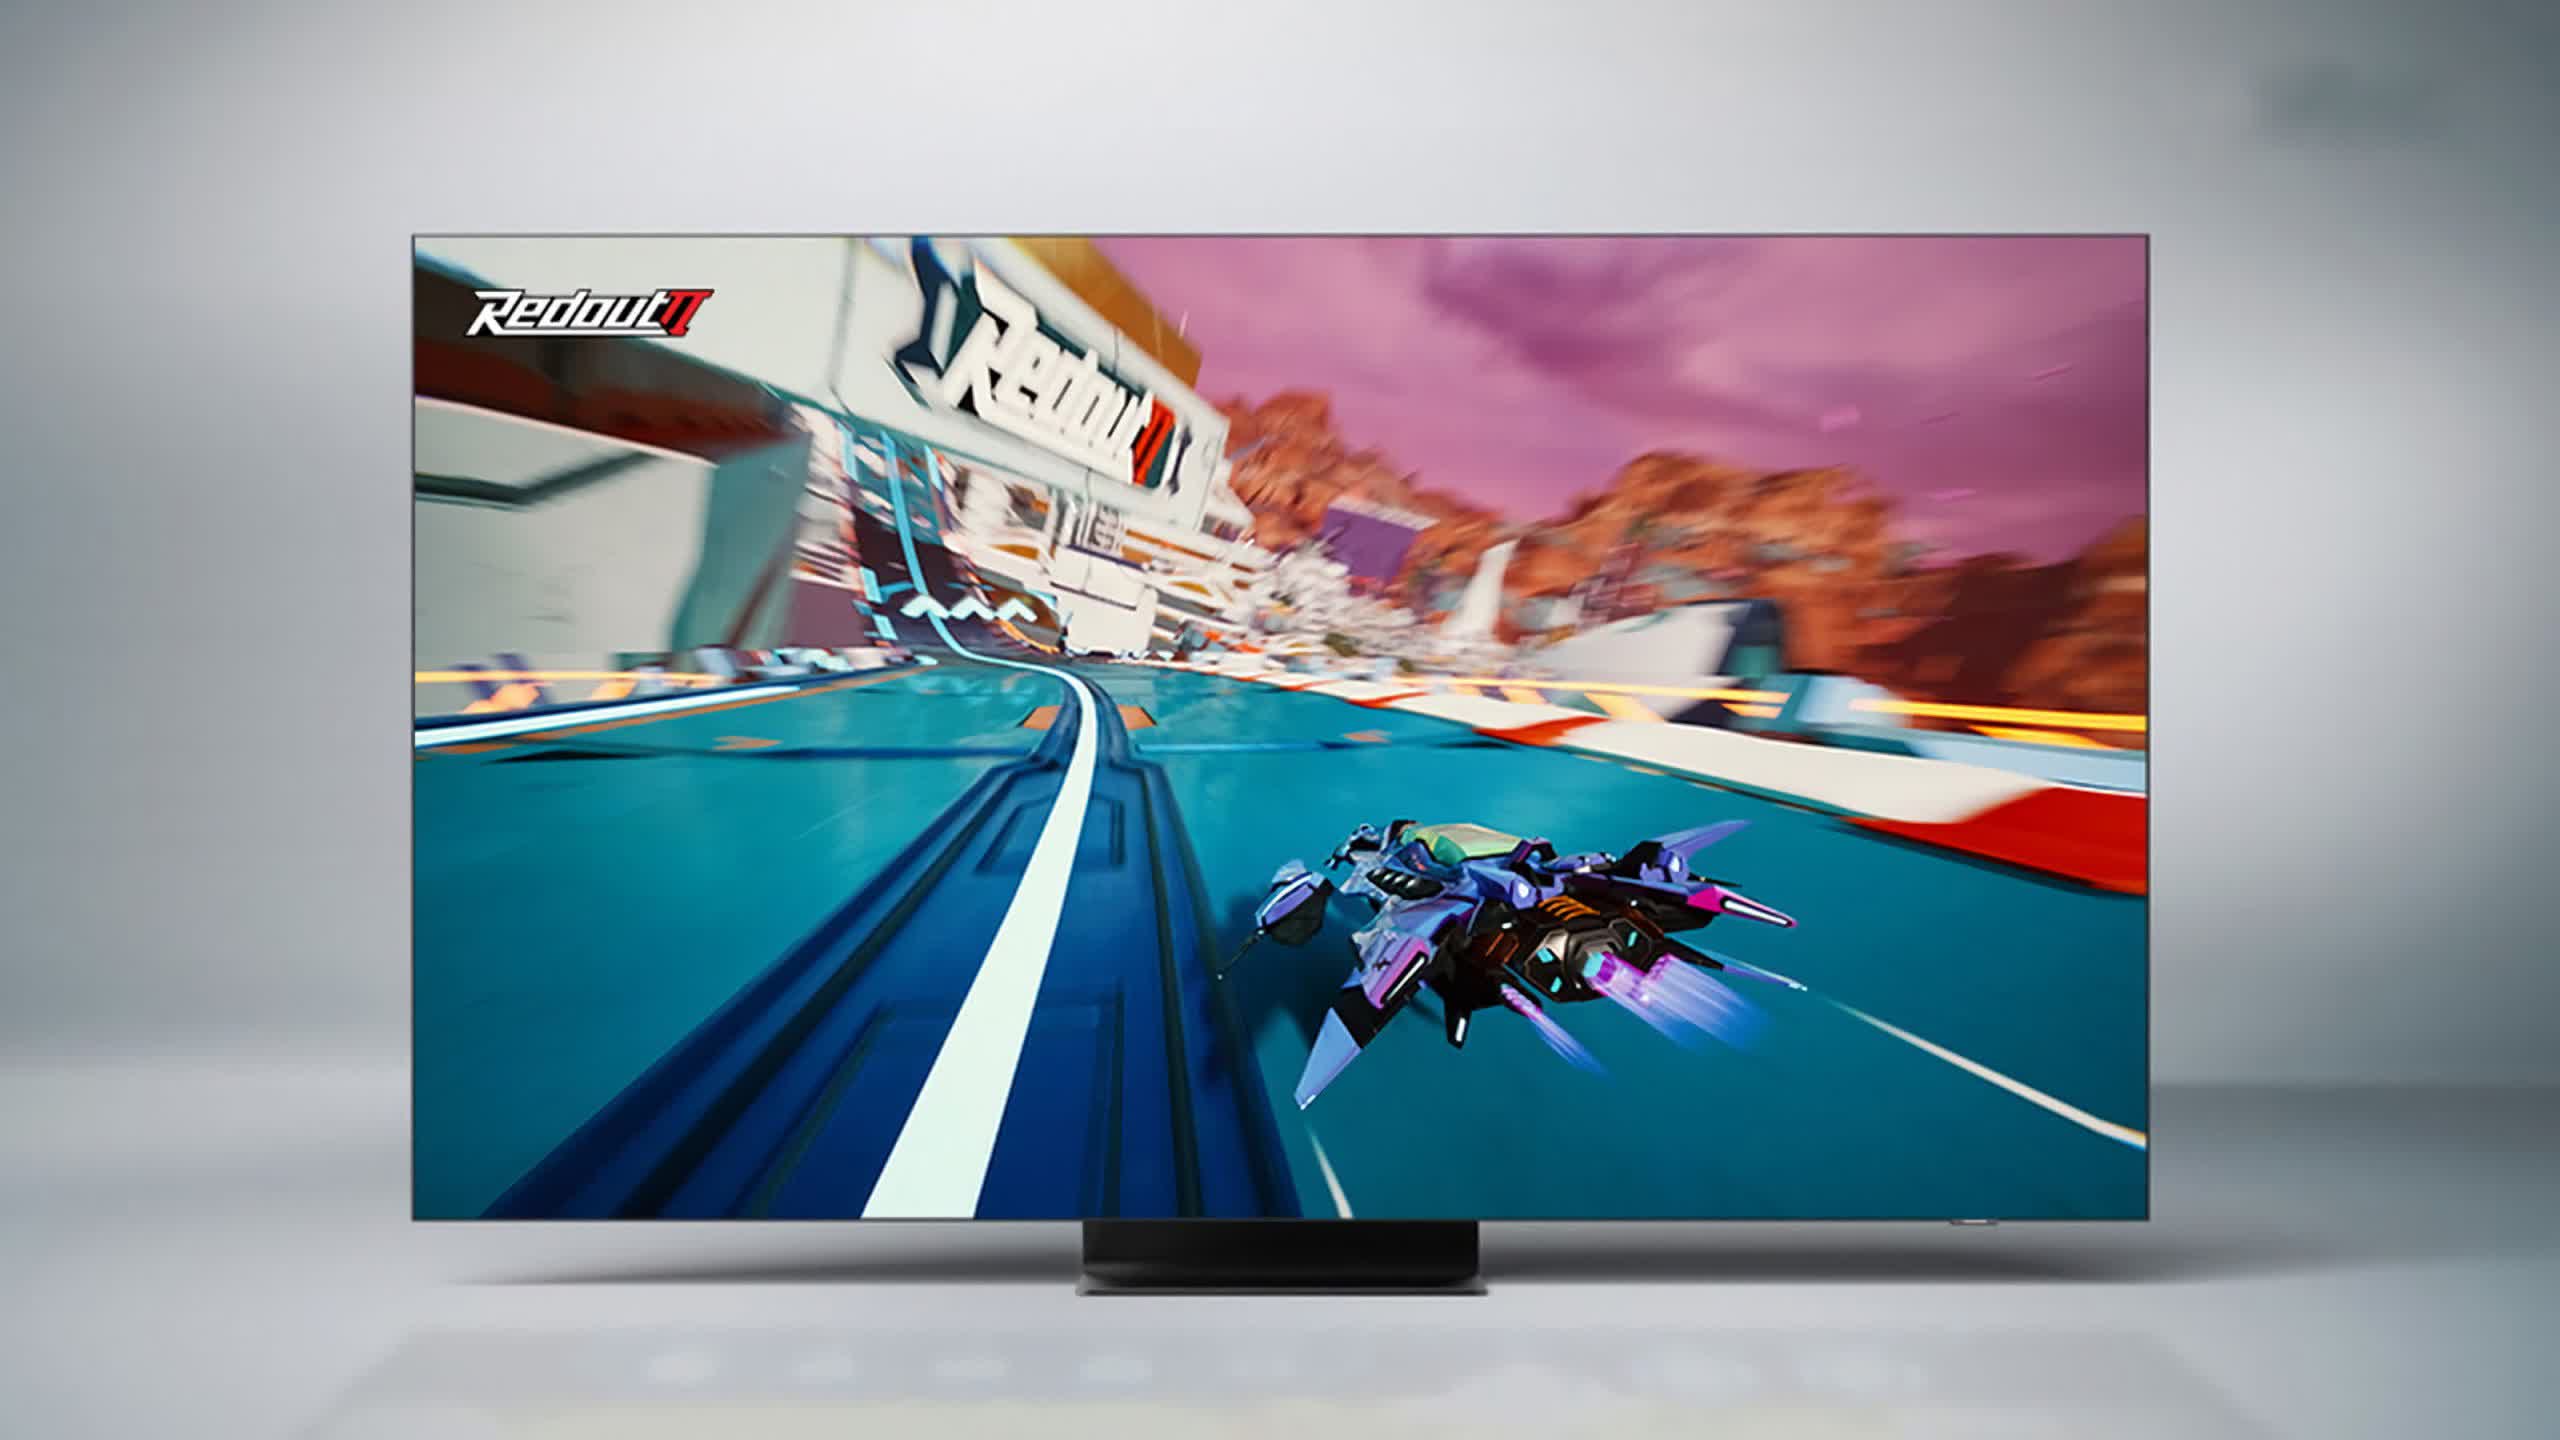 Samsung's 2022 TVs have a gaming hub that supports Stadia and GeForce Now, as well as consoles